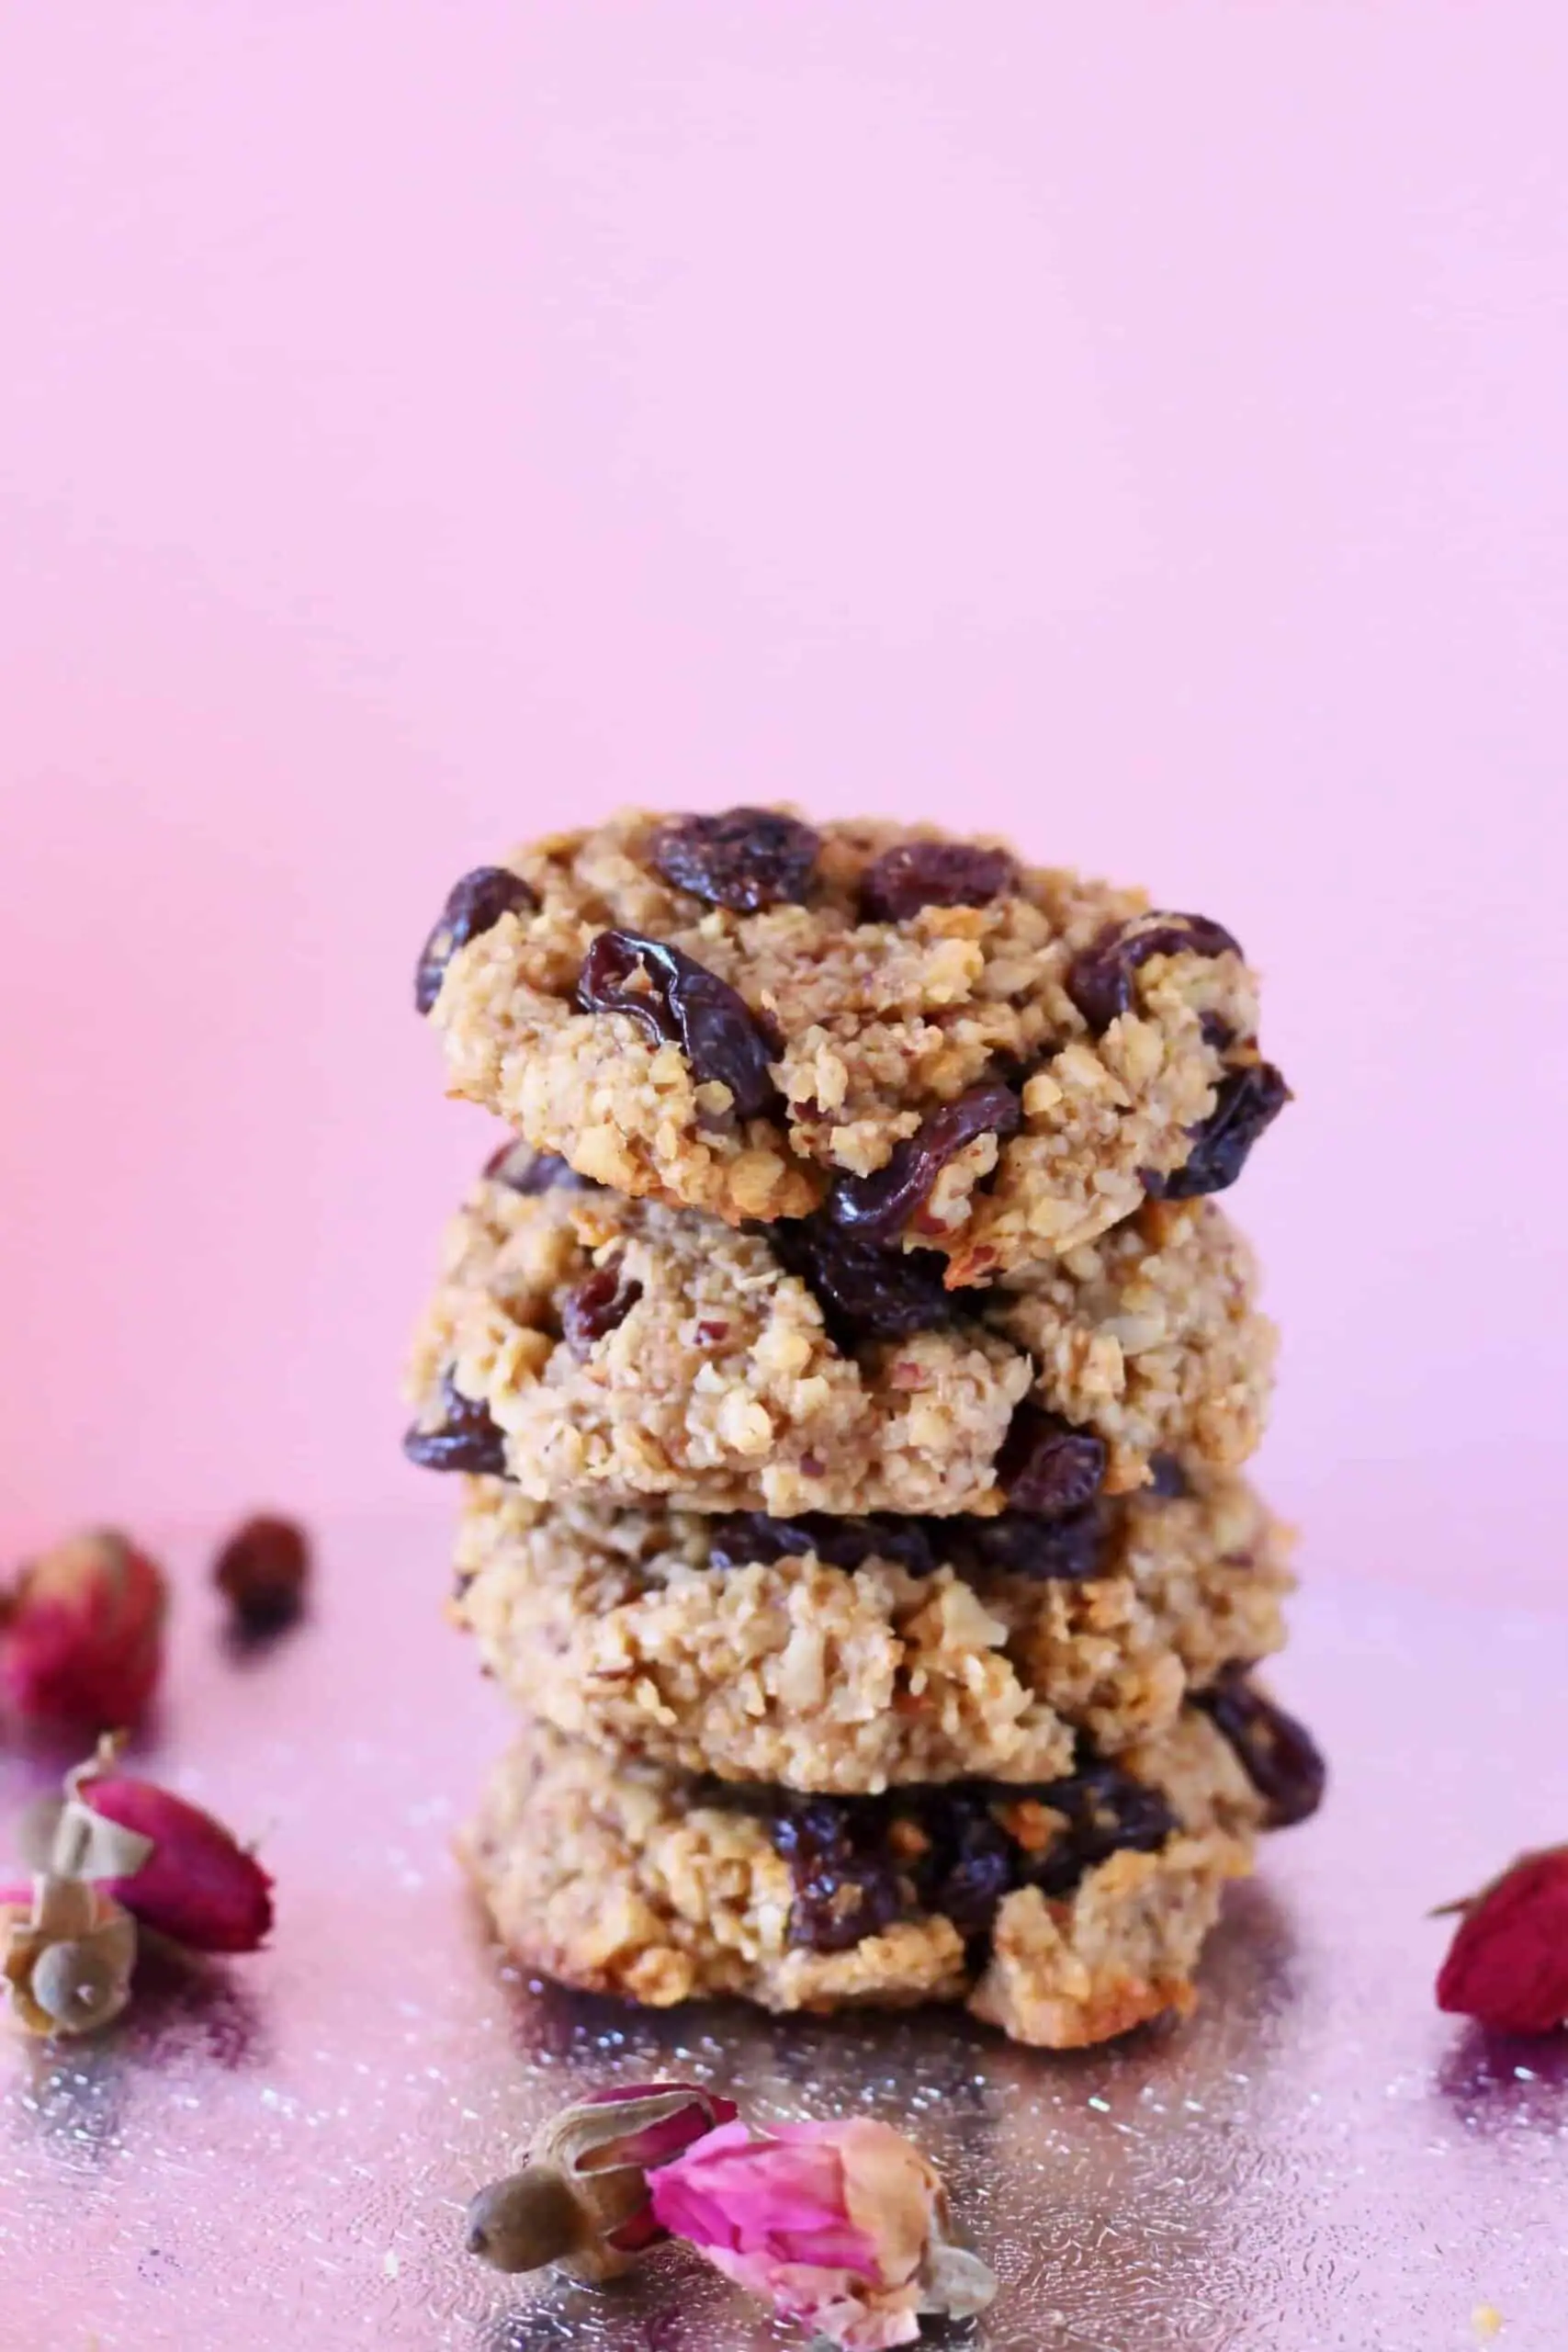 Four oatmeal cookies with raisins stacked up on a silver surface against a light pink background